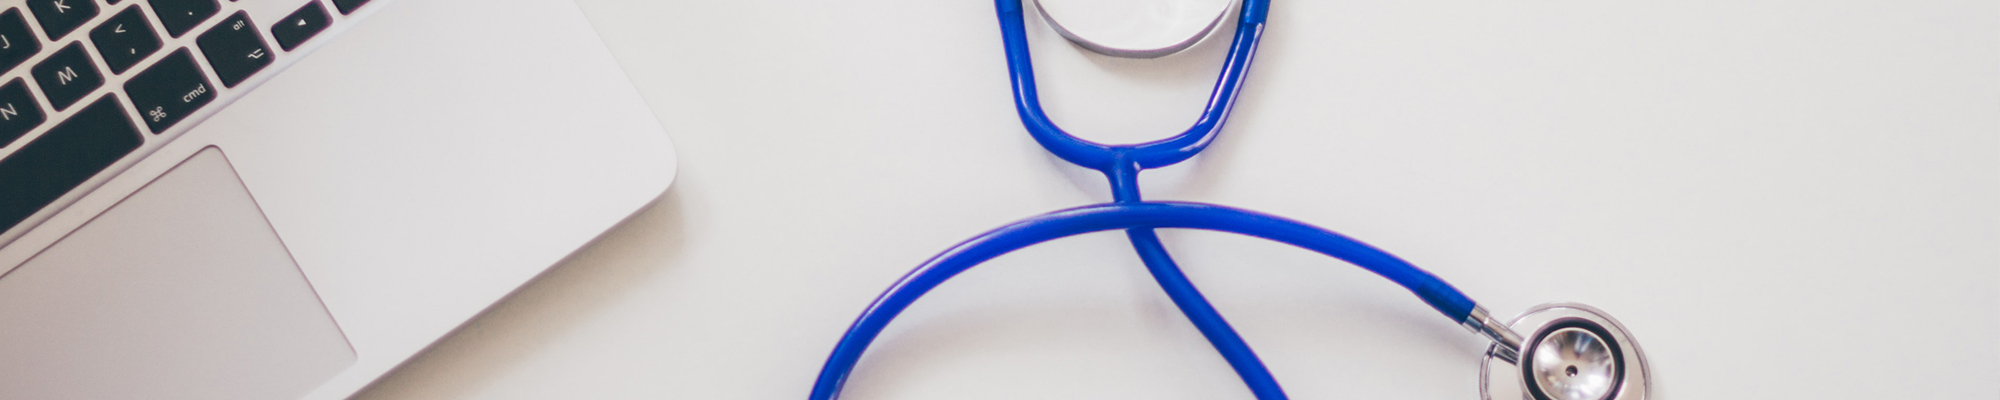  Image of a stethoscope on a laptop